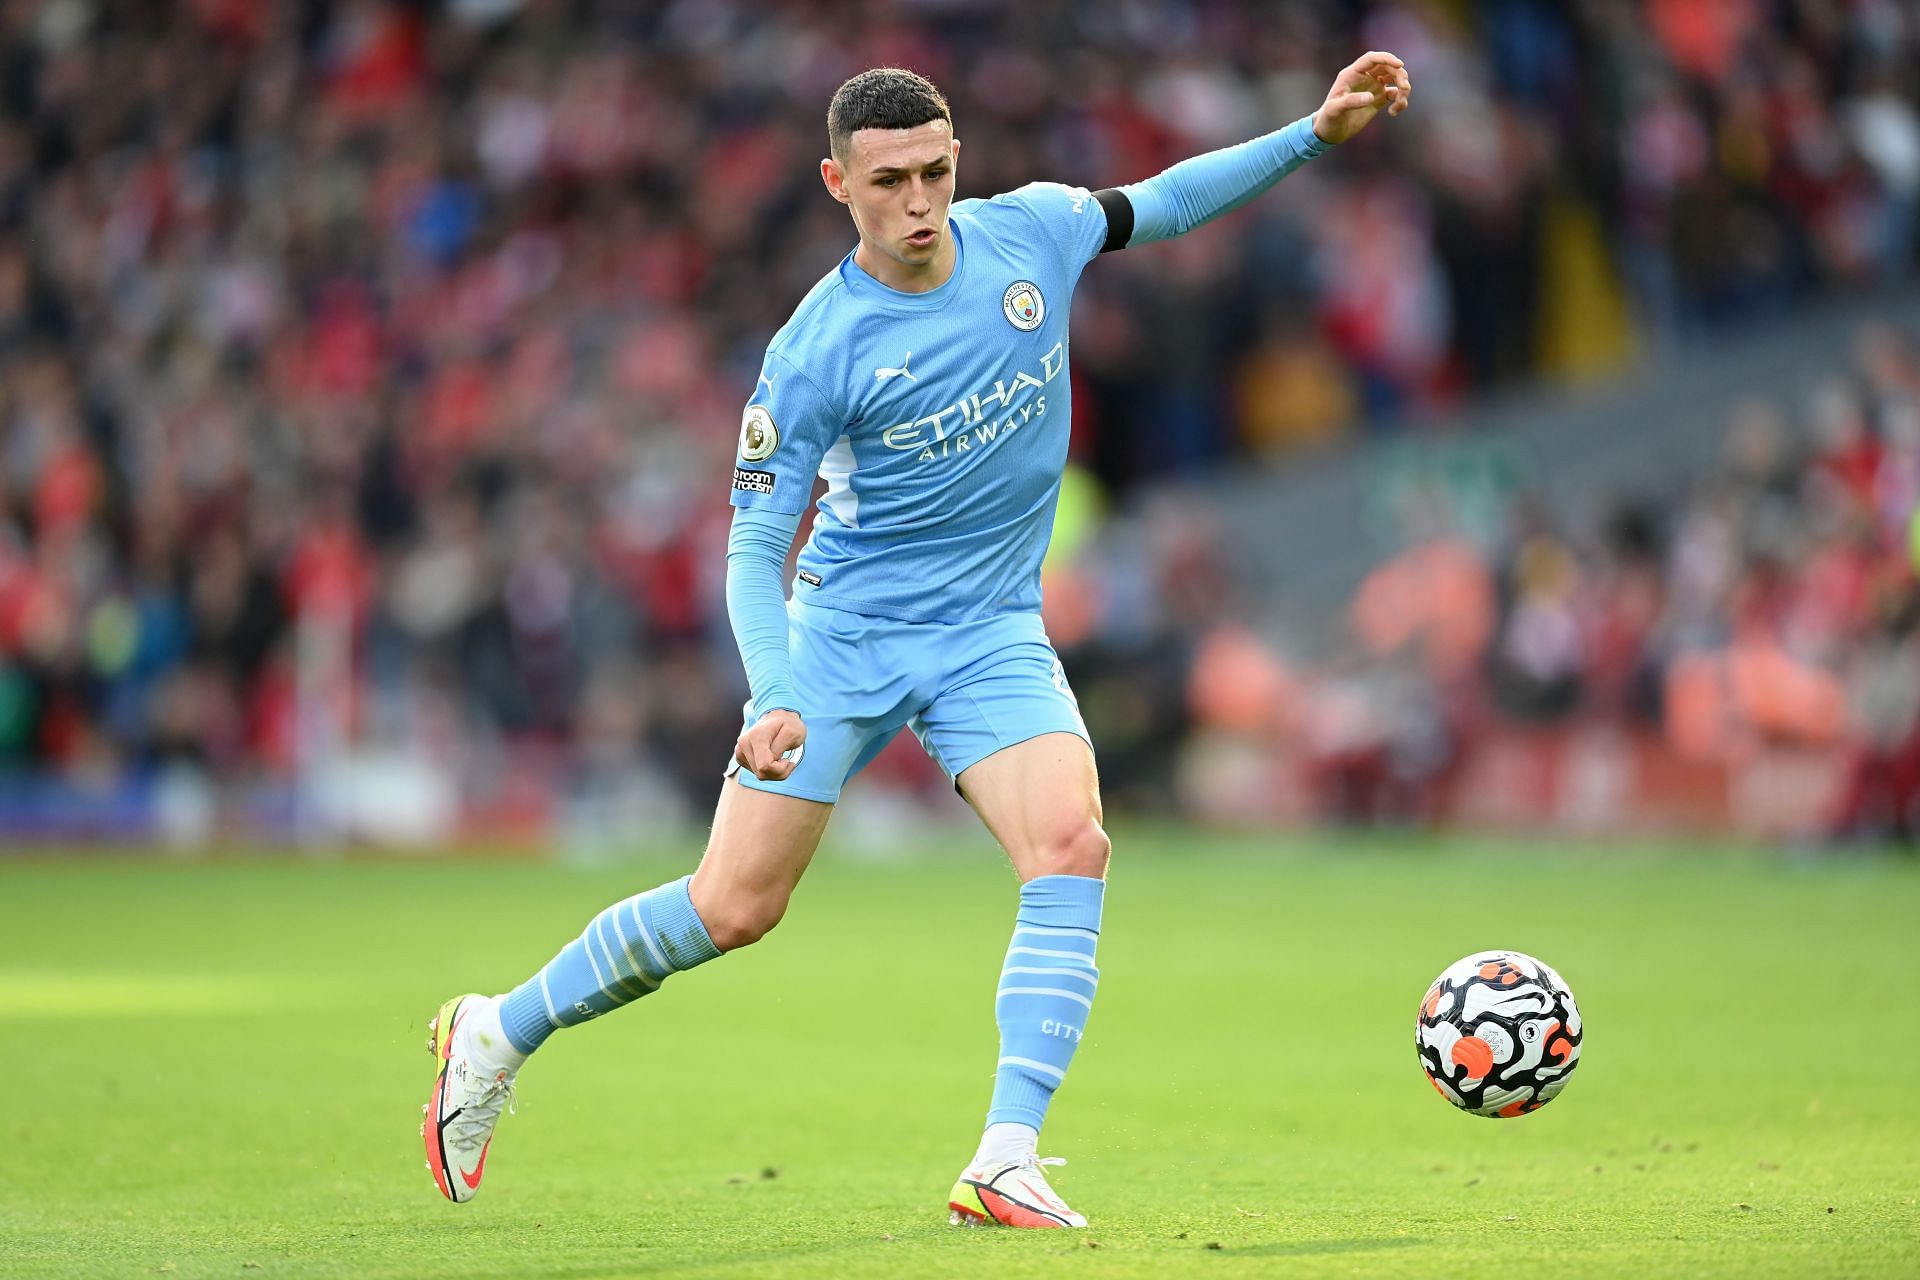 Phil Foden has blossomed into a world-class player at Manchester City.